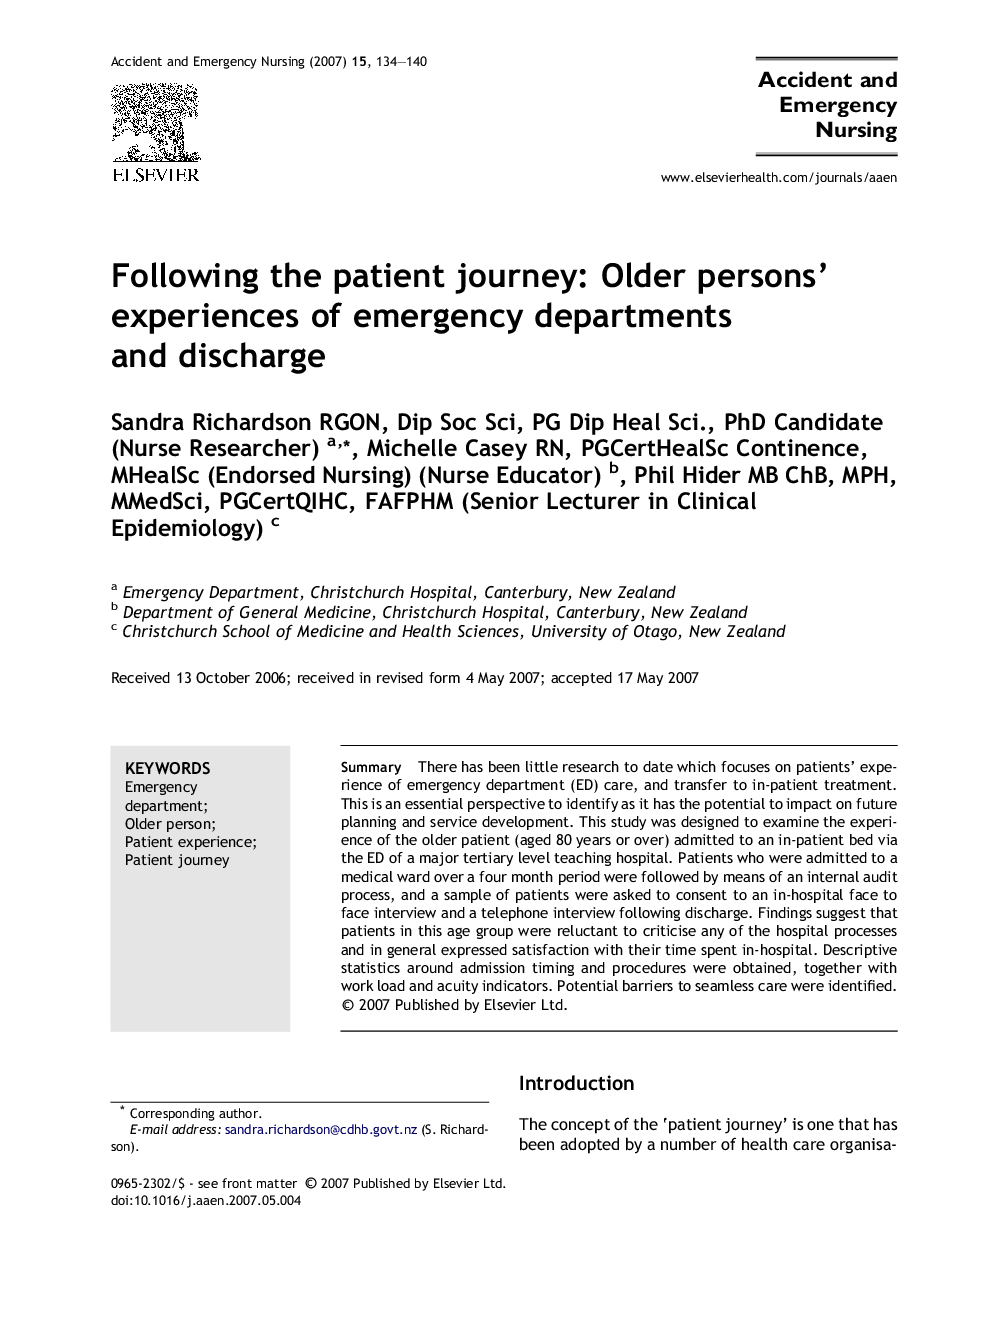 Following the patient journey: Older persons’ experiences of emergency departments and discharge